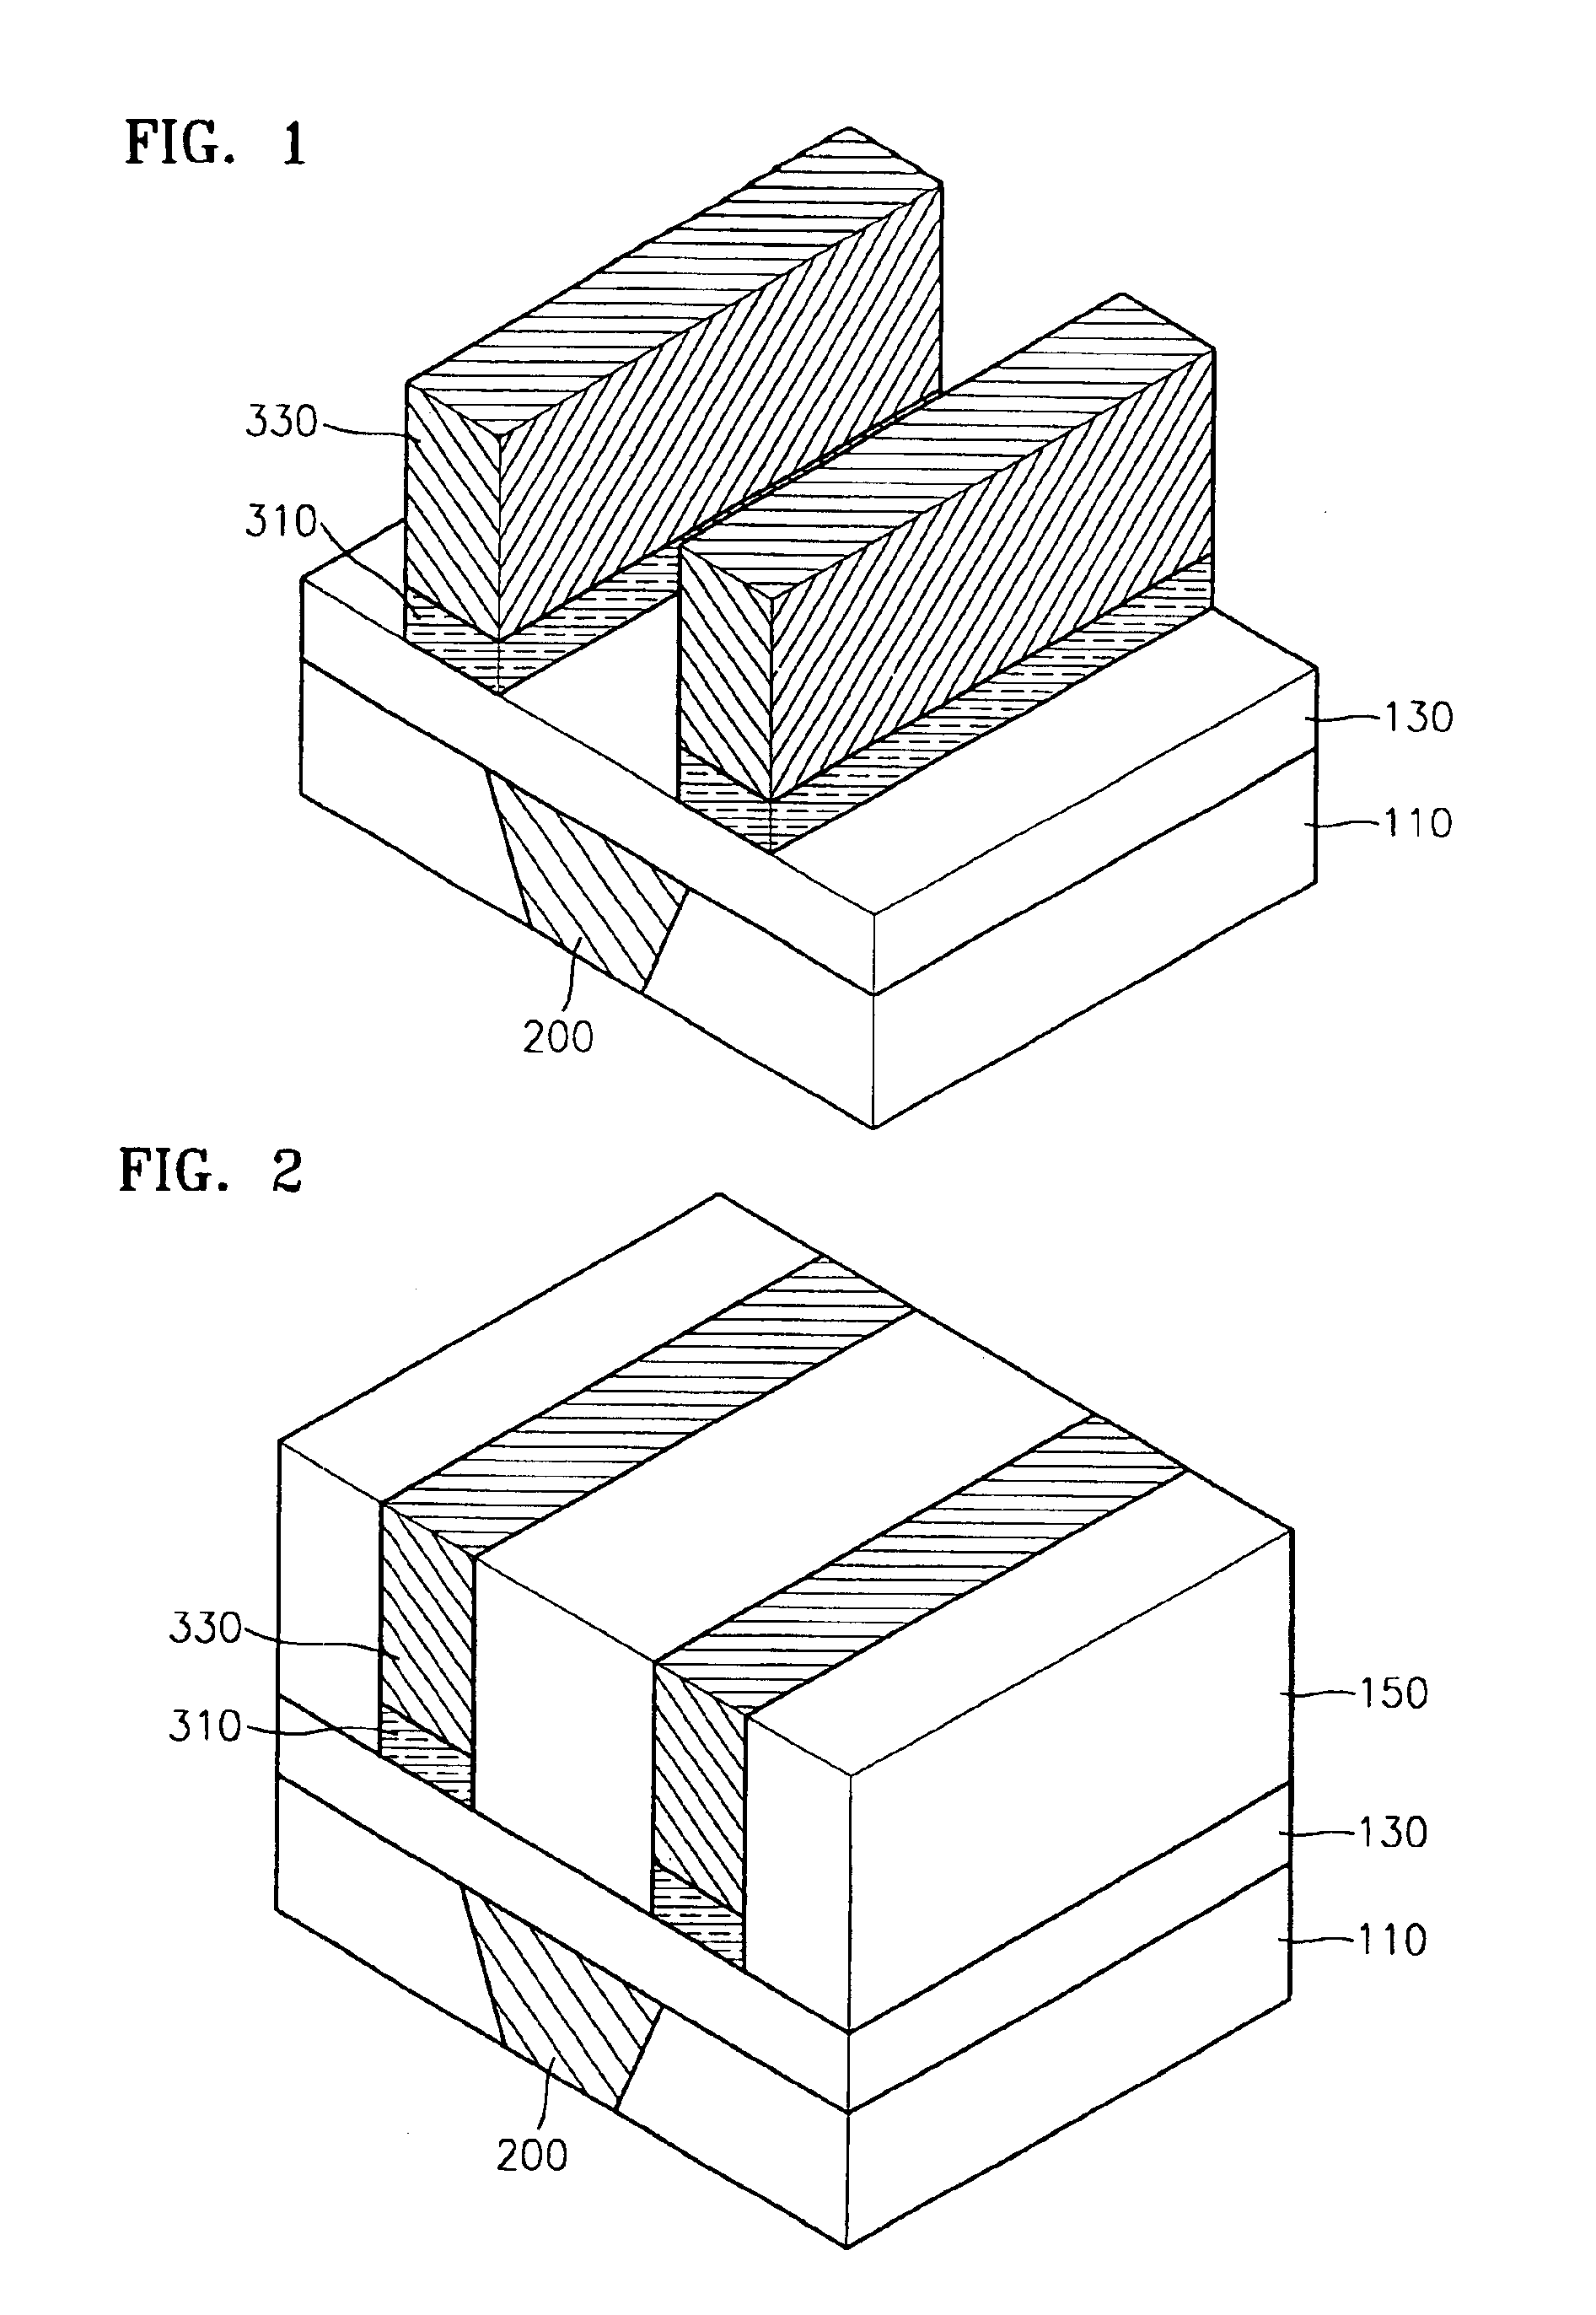 Method of manufacturing semiconductor device with interconnections and interconnection contacts and a device formed thereby